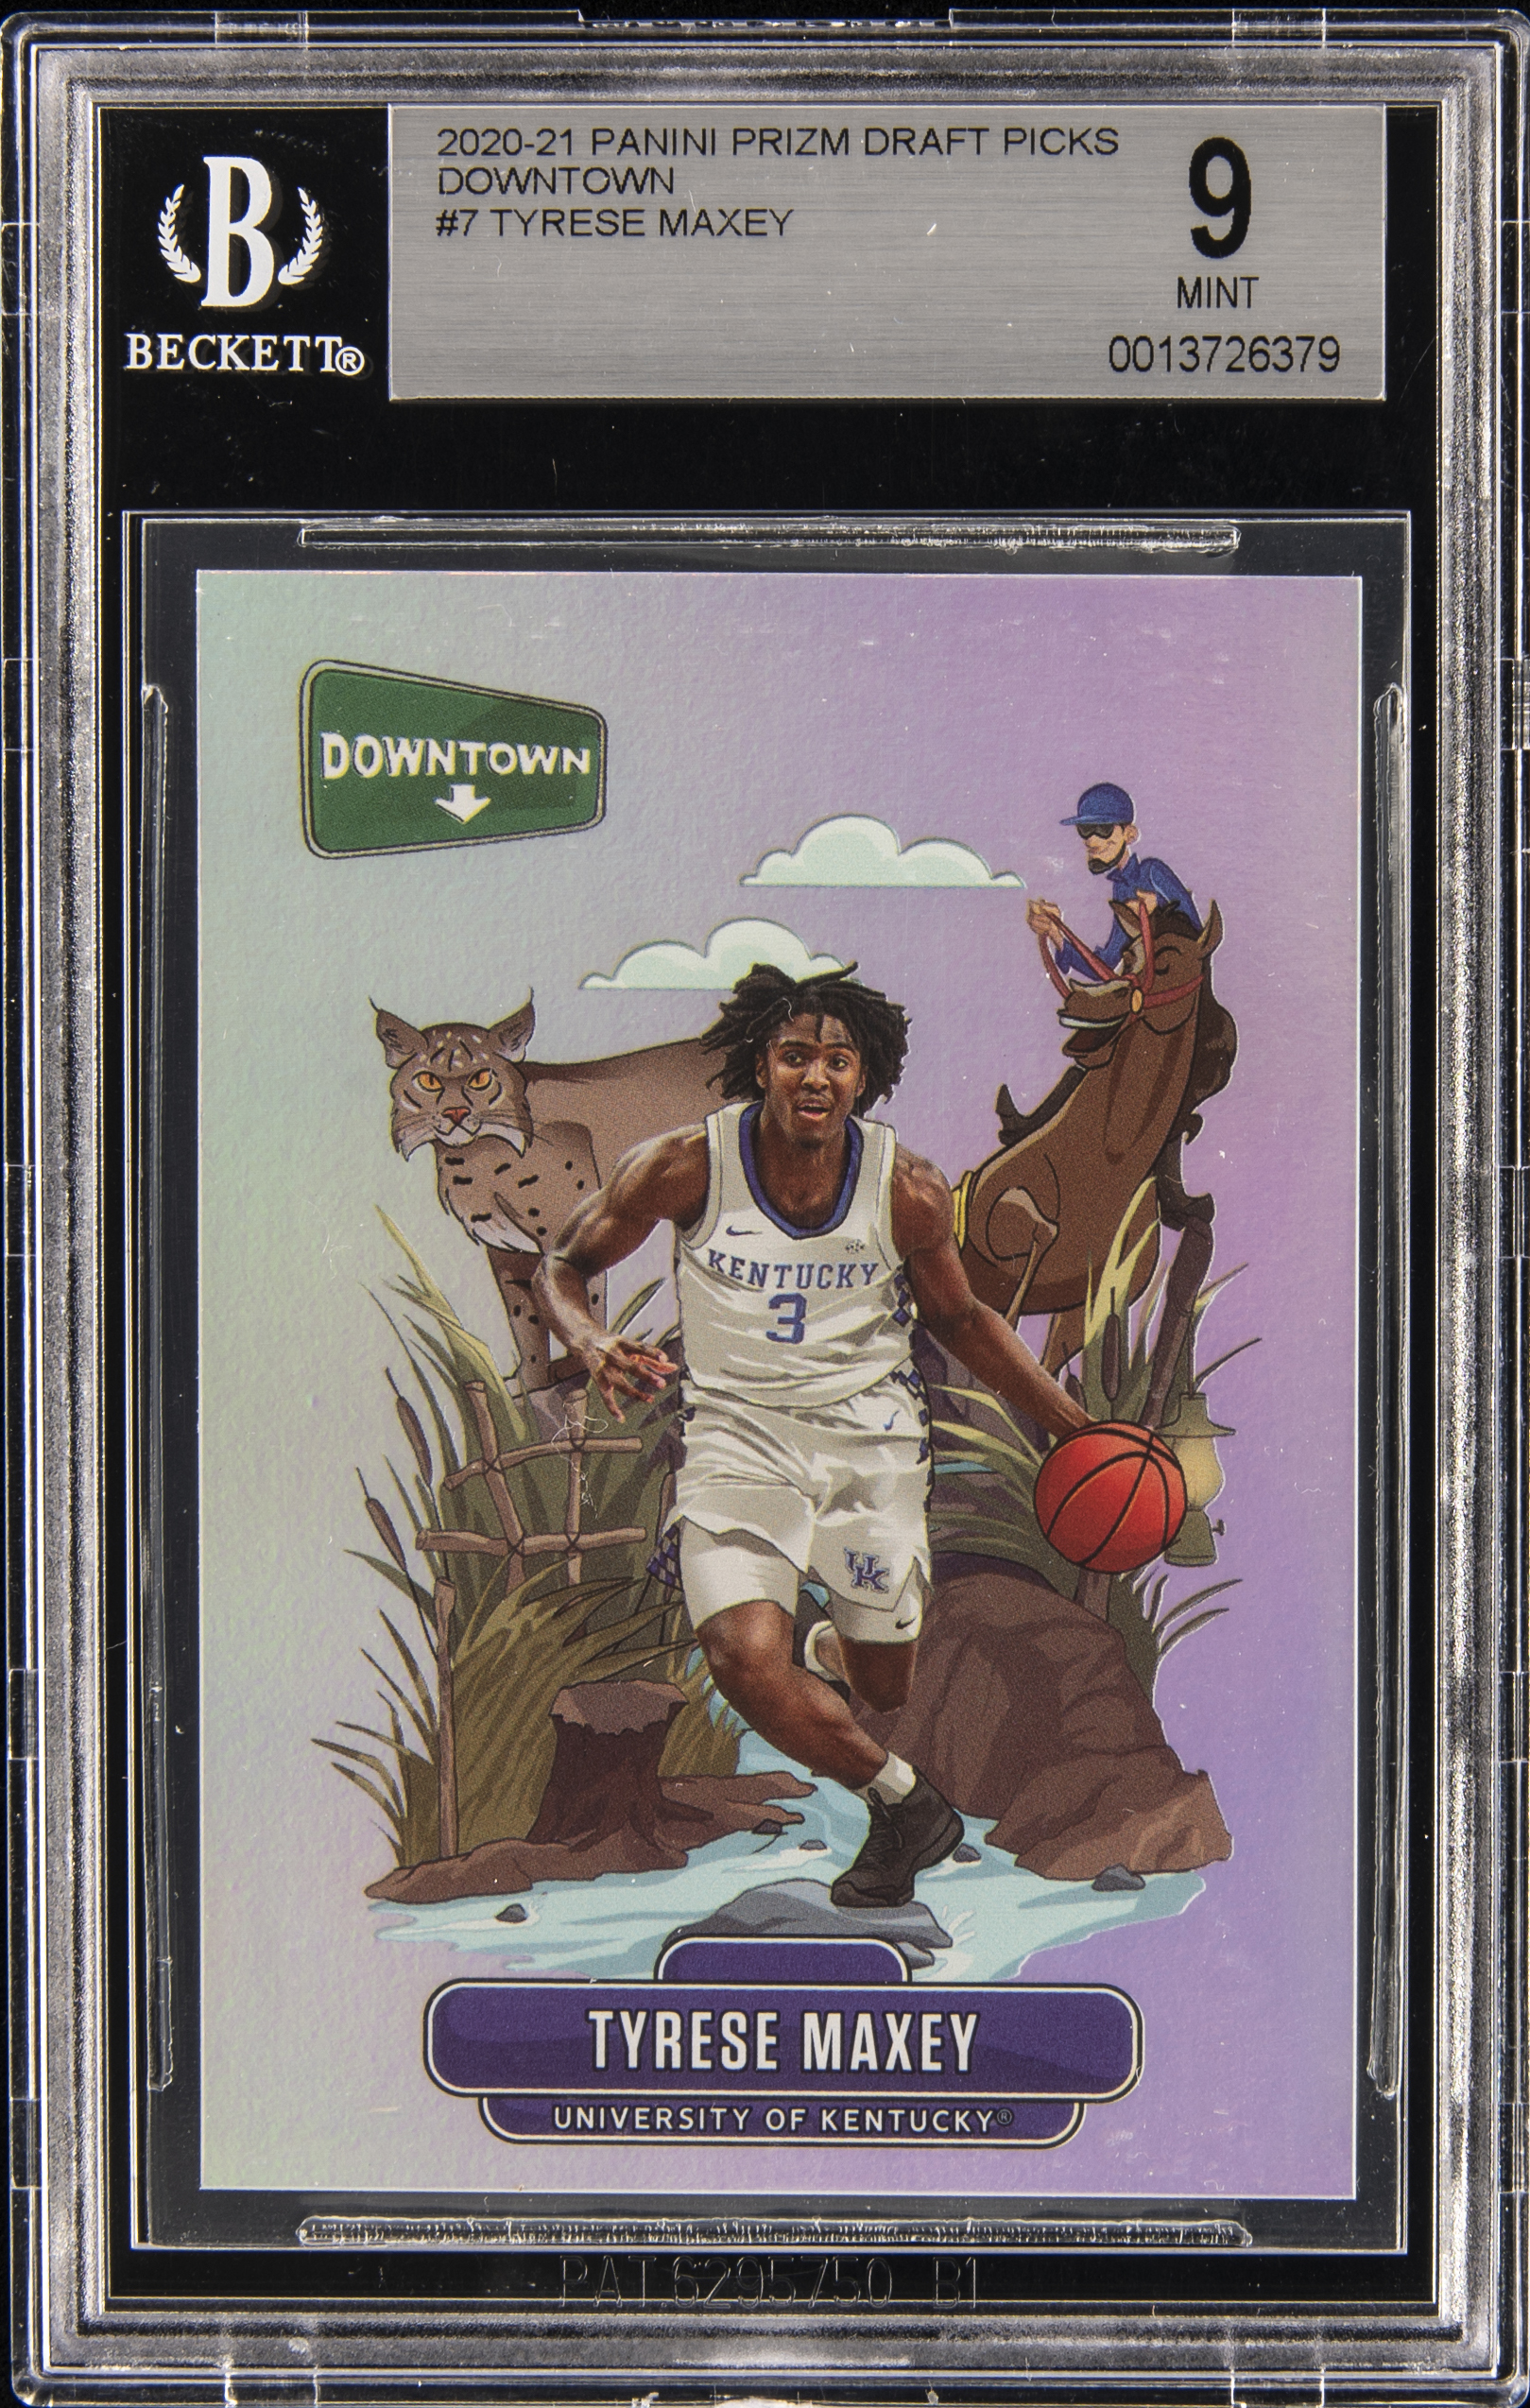 2020-21 Panini Prizm Draft Picks Downtown #7 Tyrese Maxey Rookie Card – BGS MINT 9